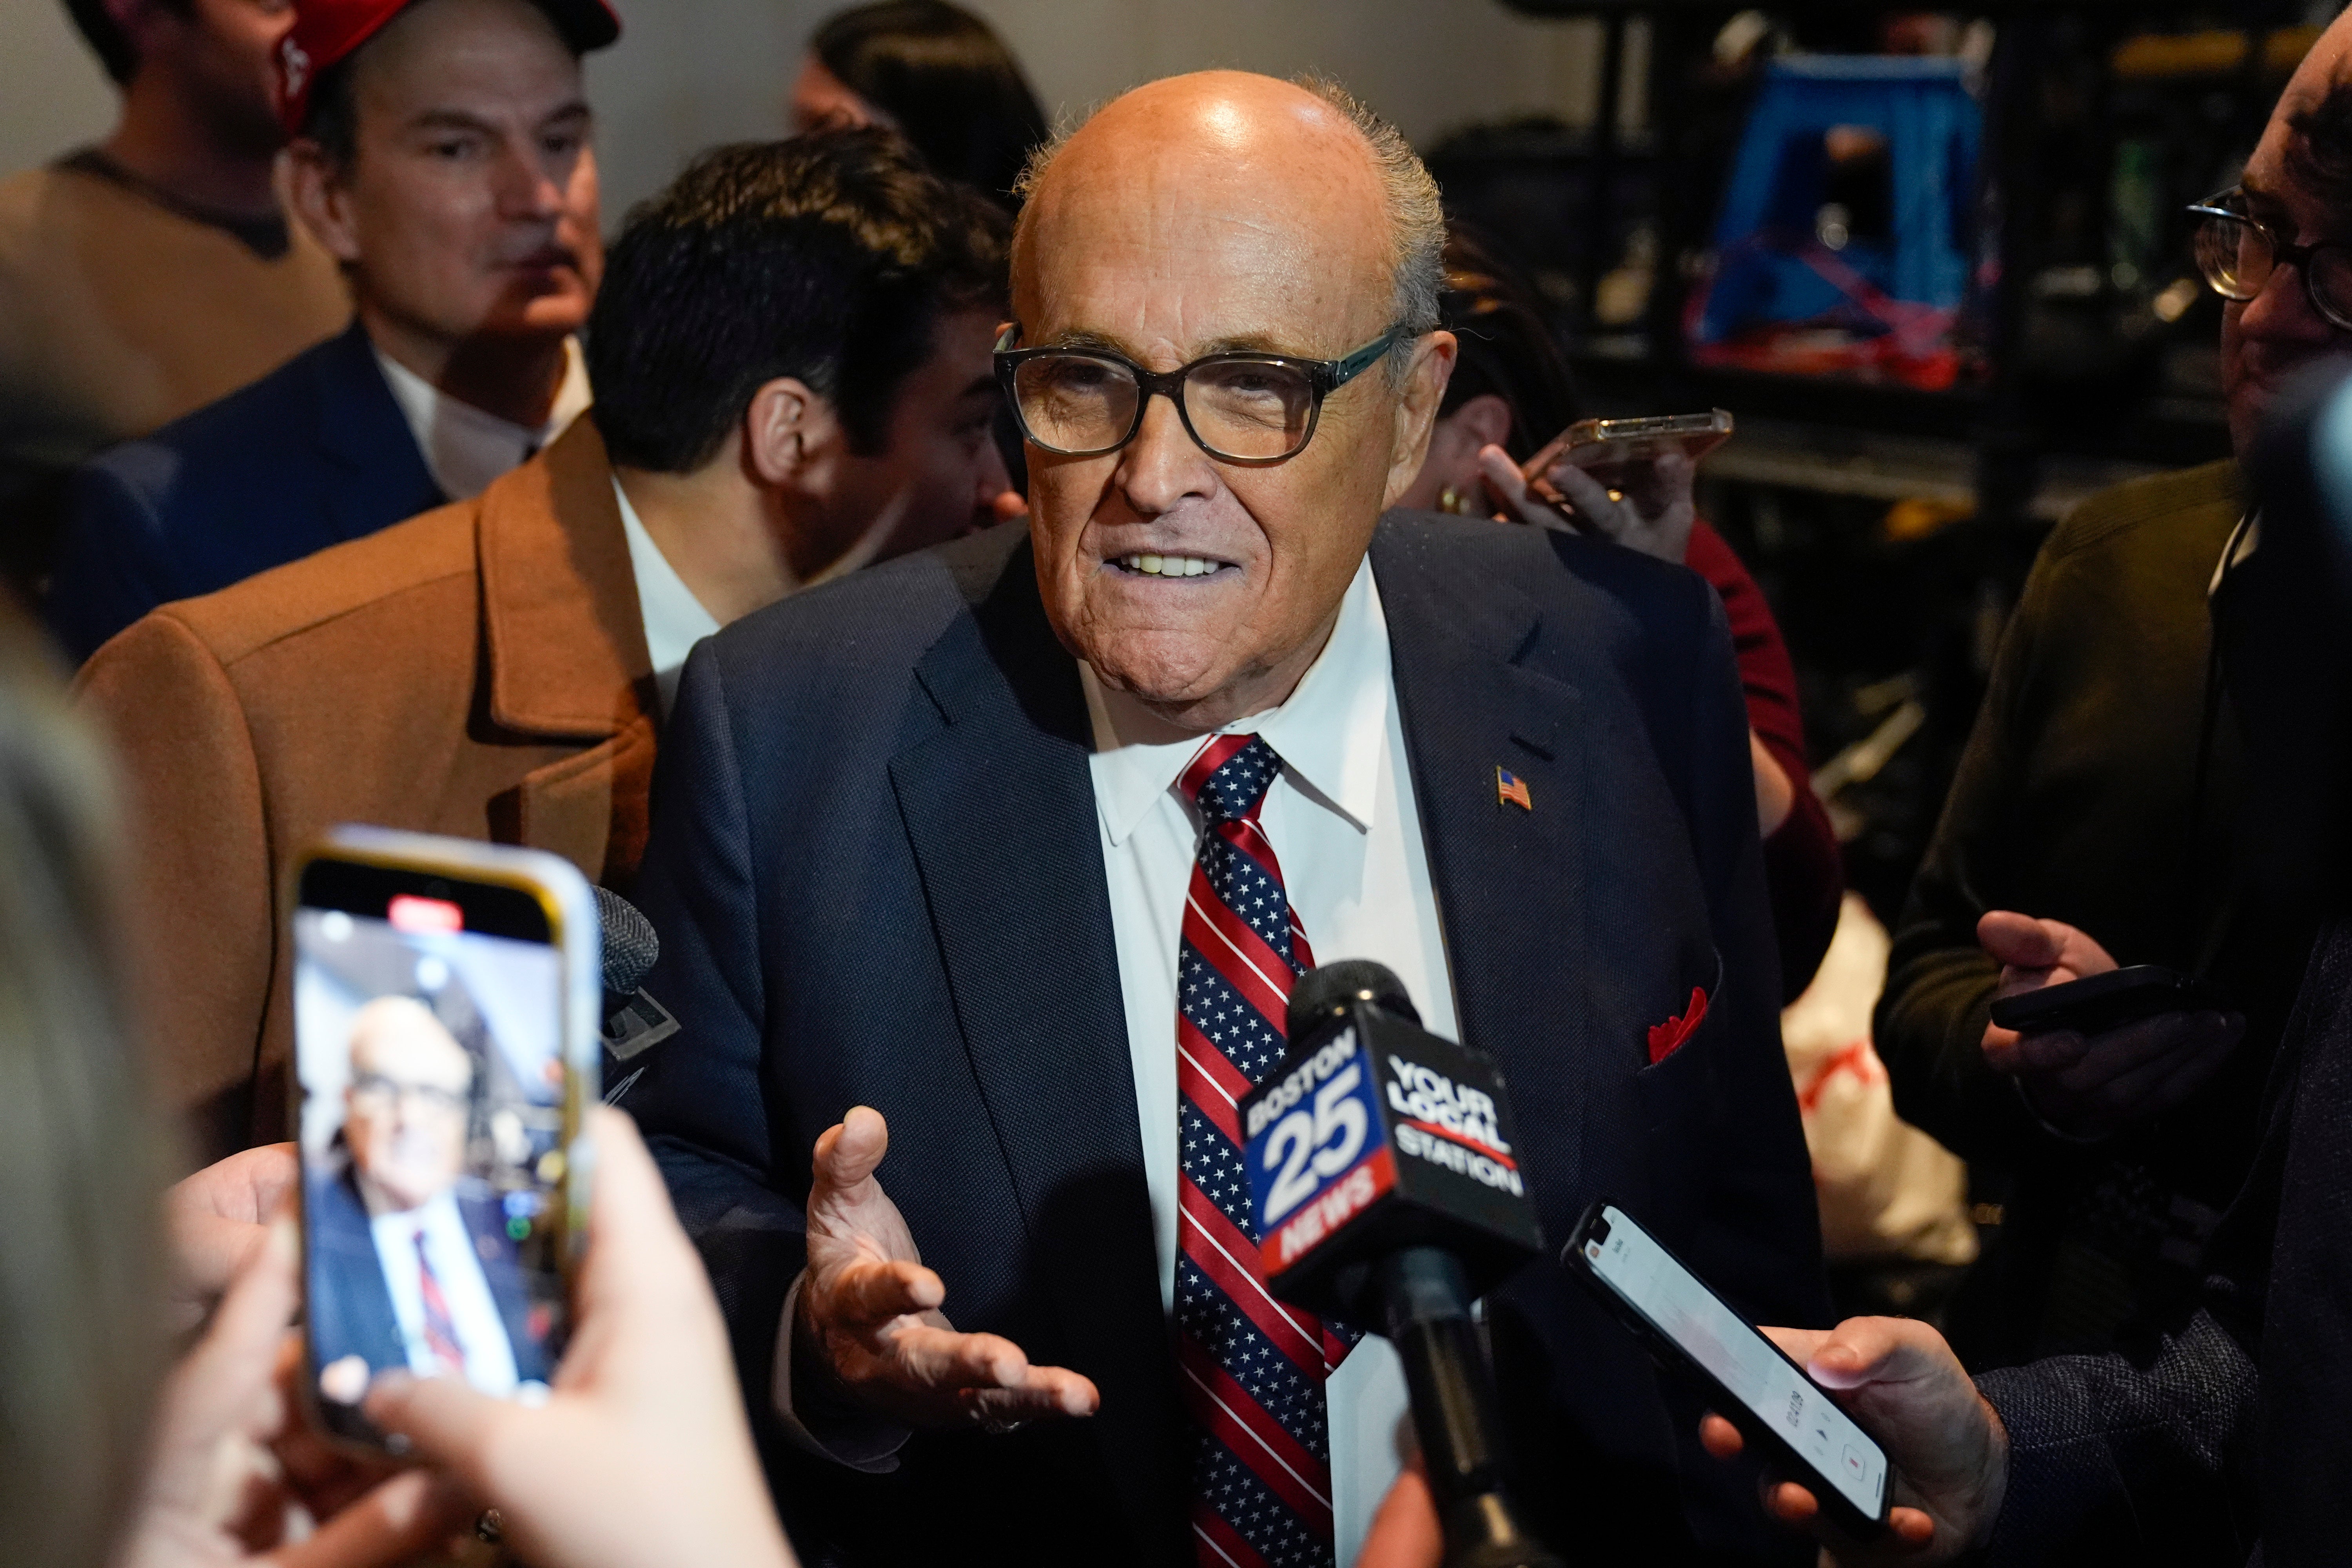 Donald Trump’s former lawyer Rudy Giuliani owes $40,000 in golf club membership fees, according to bankruptcy filings